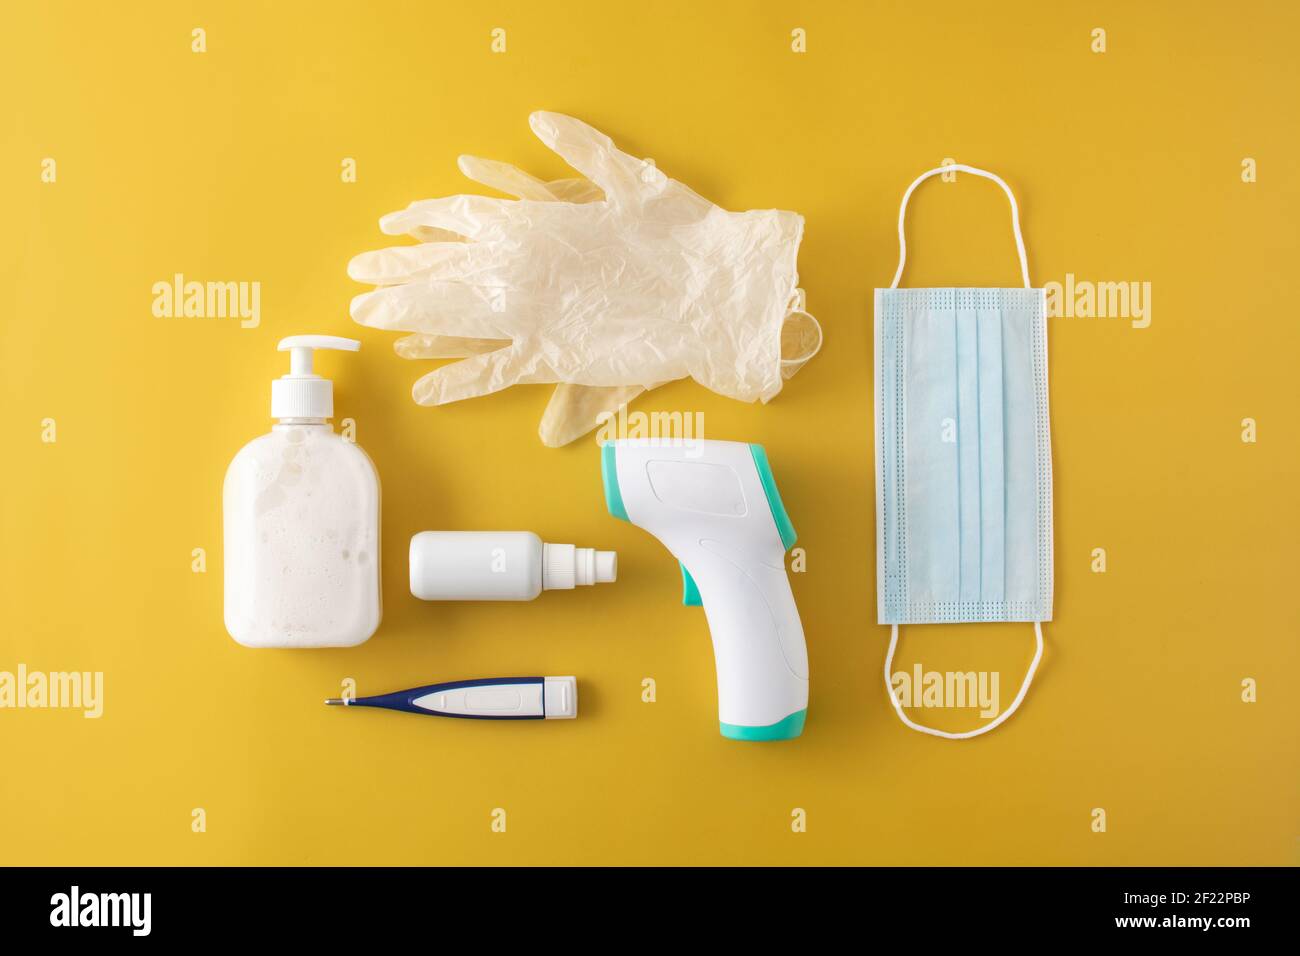 Medical gloves,disinfectant, thermometer, hand sanitizer and surgical mask on yellow background Stock Photo